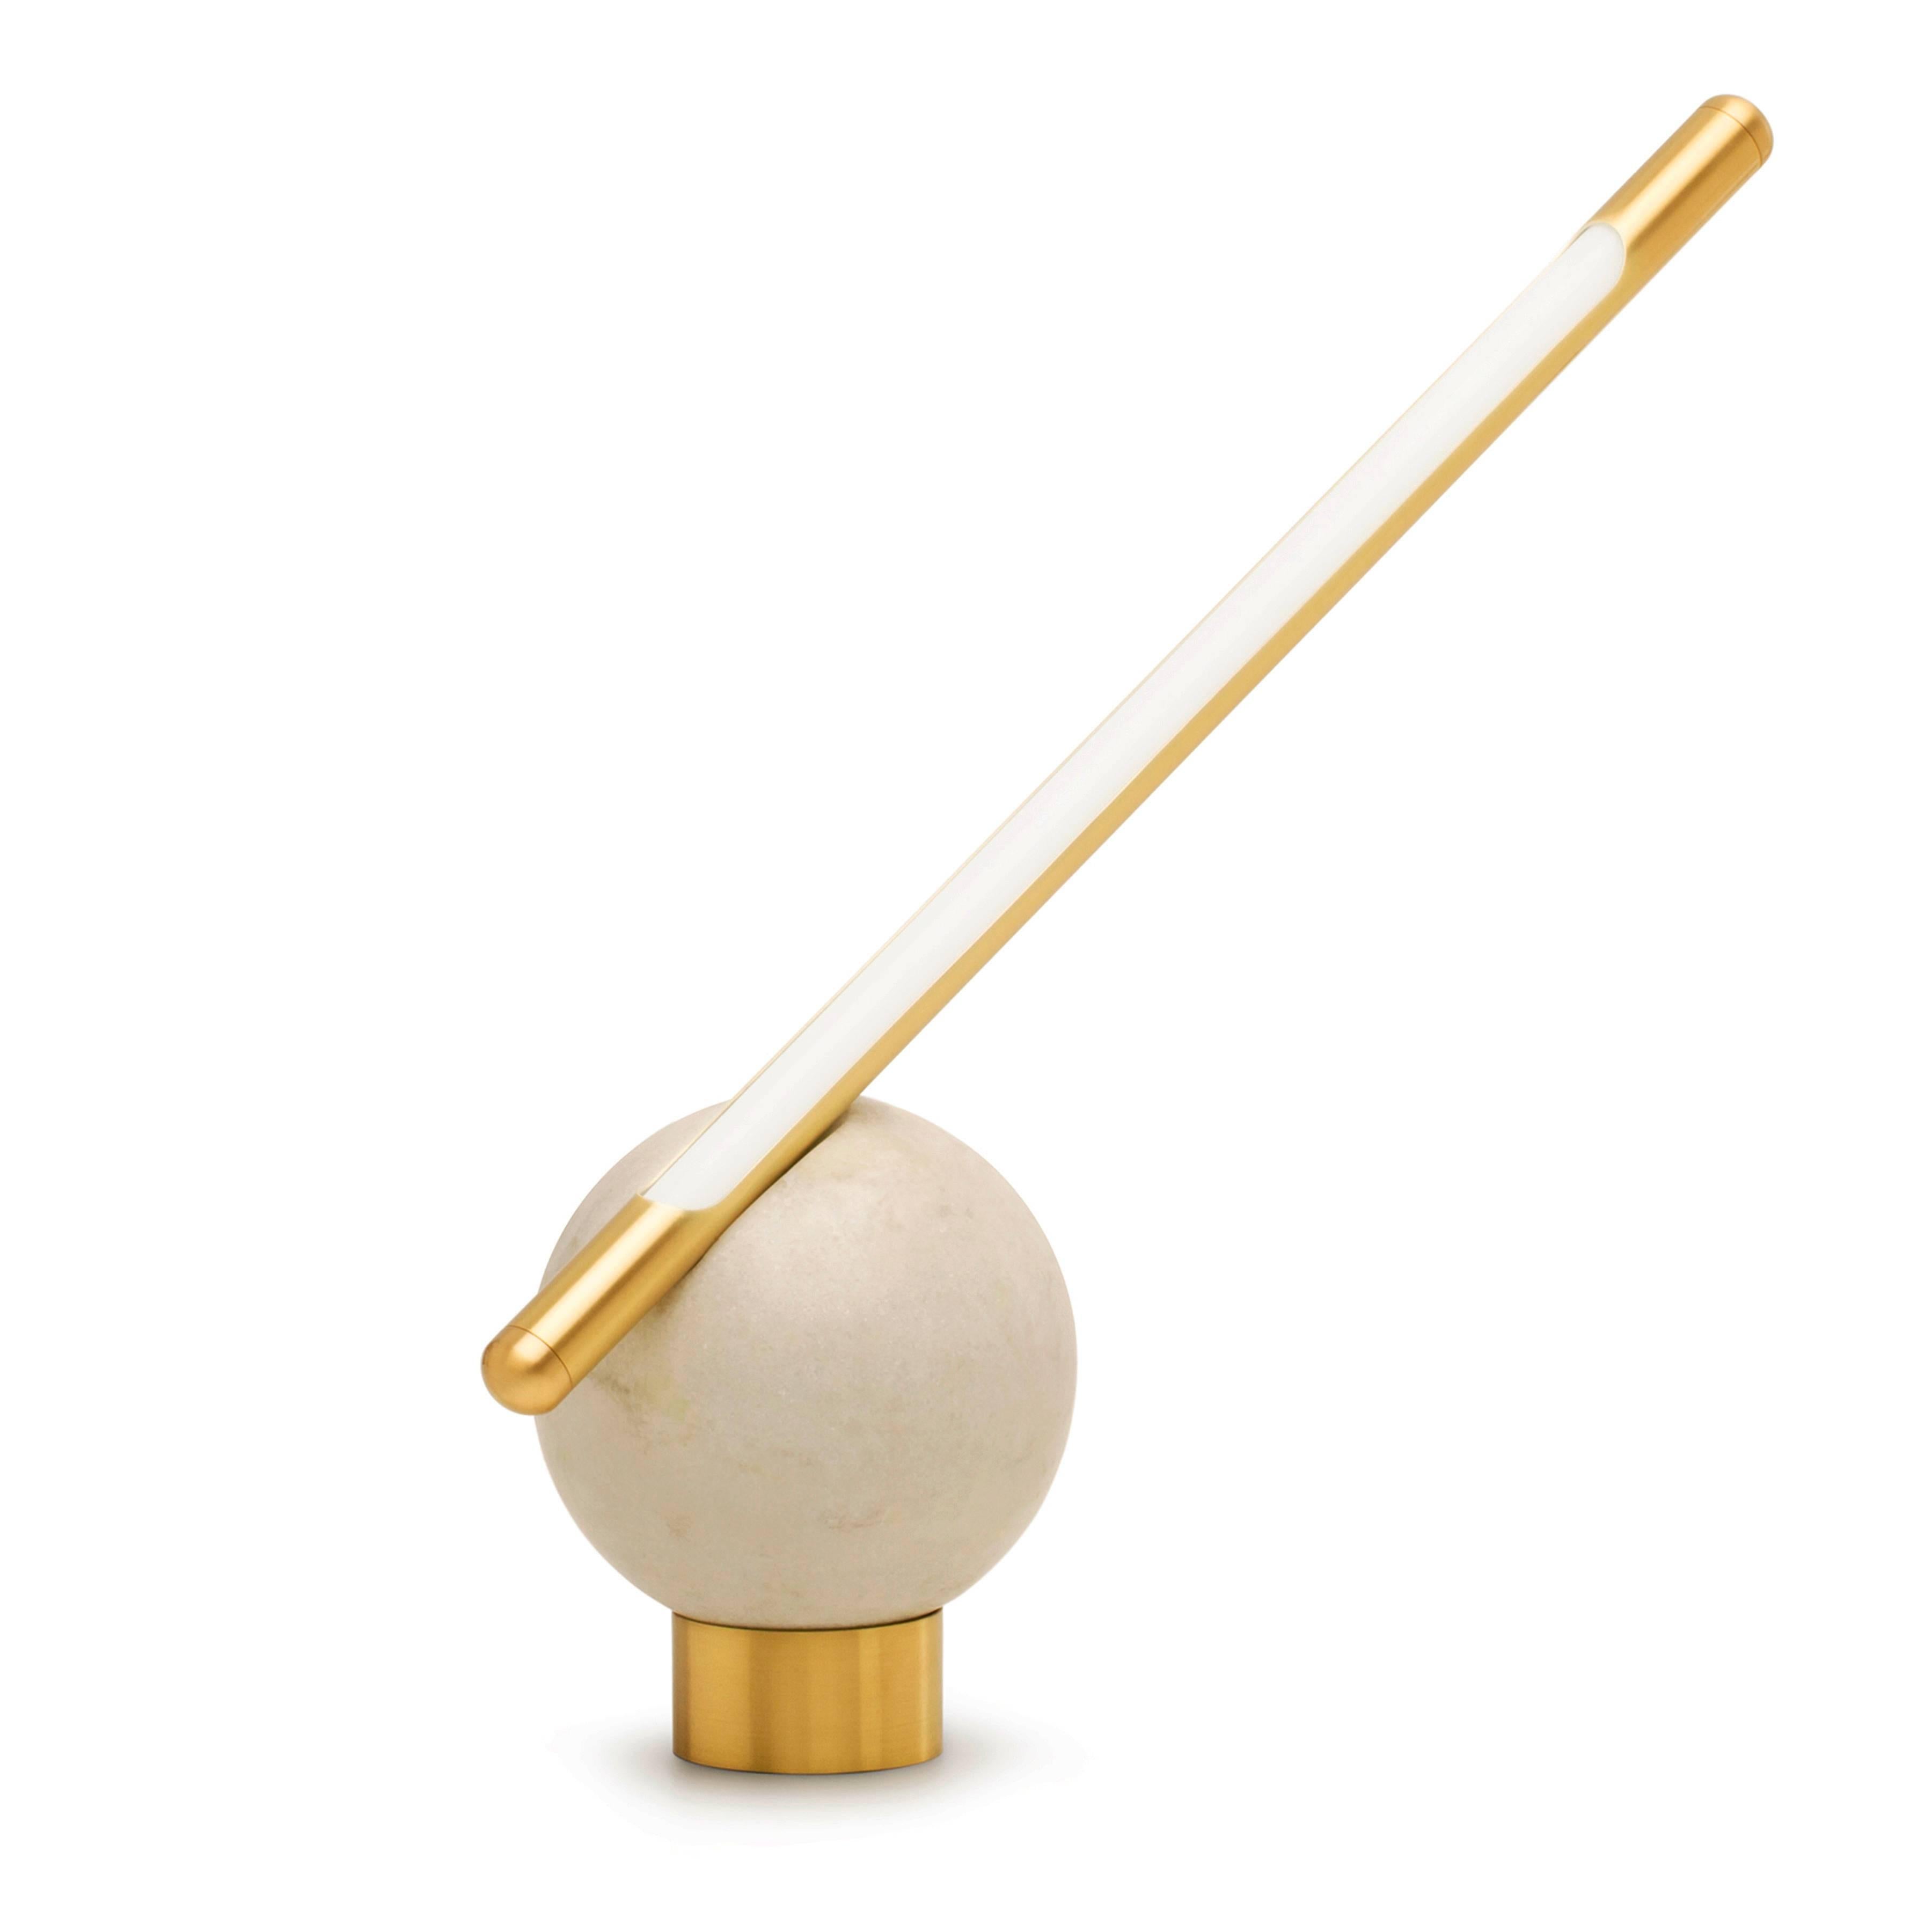 Minimalist Table Lamp in Marble and Copper, Brazilian Contemporary Style, by Tiago Curioni For Sale